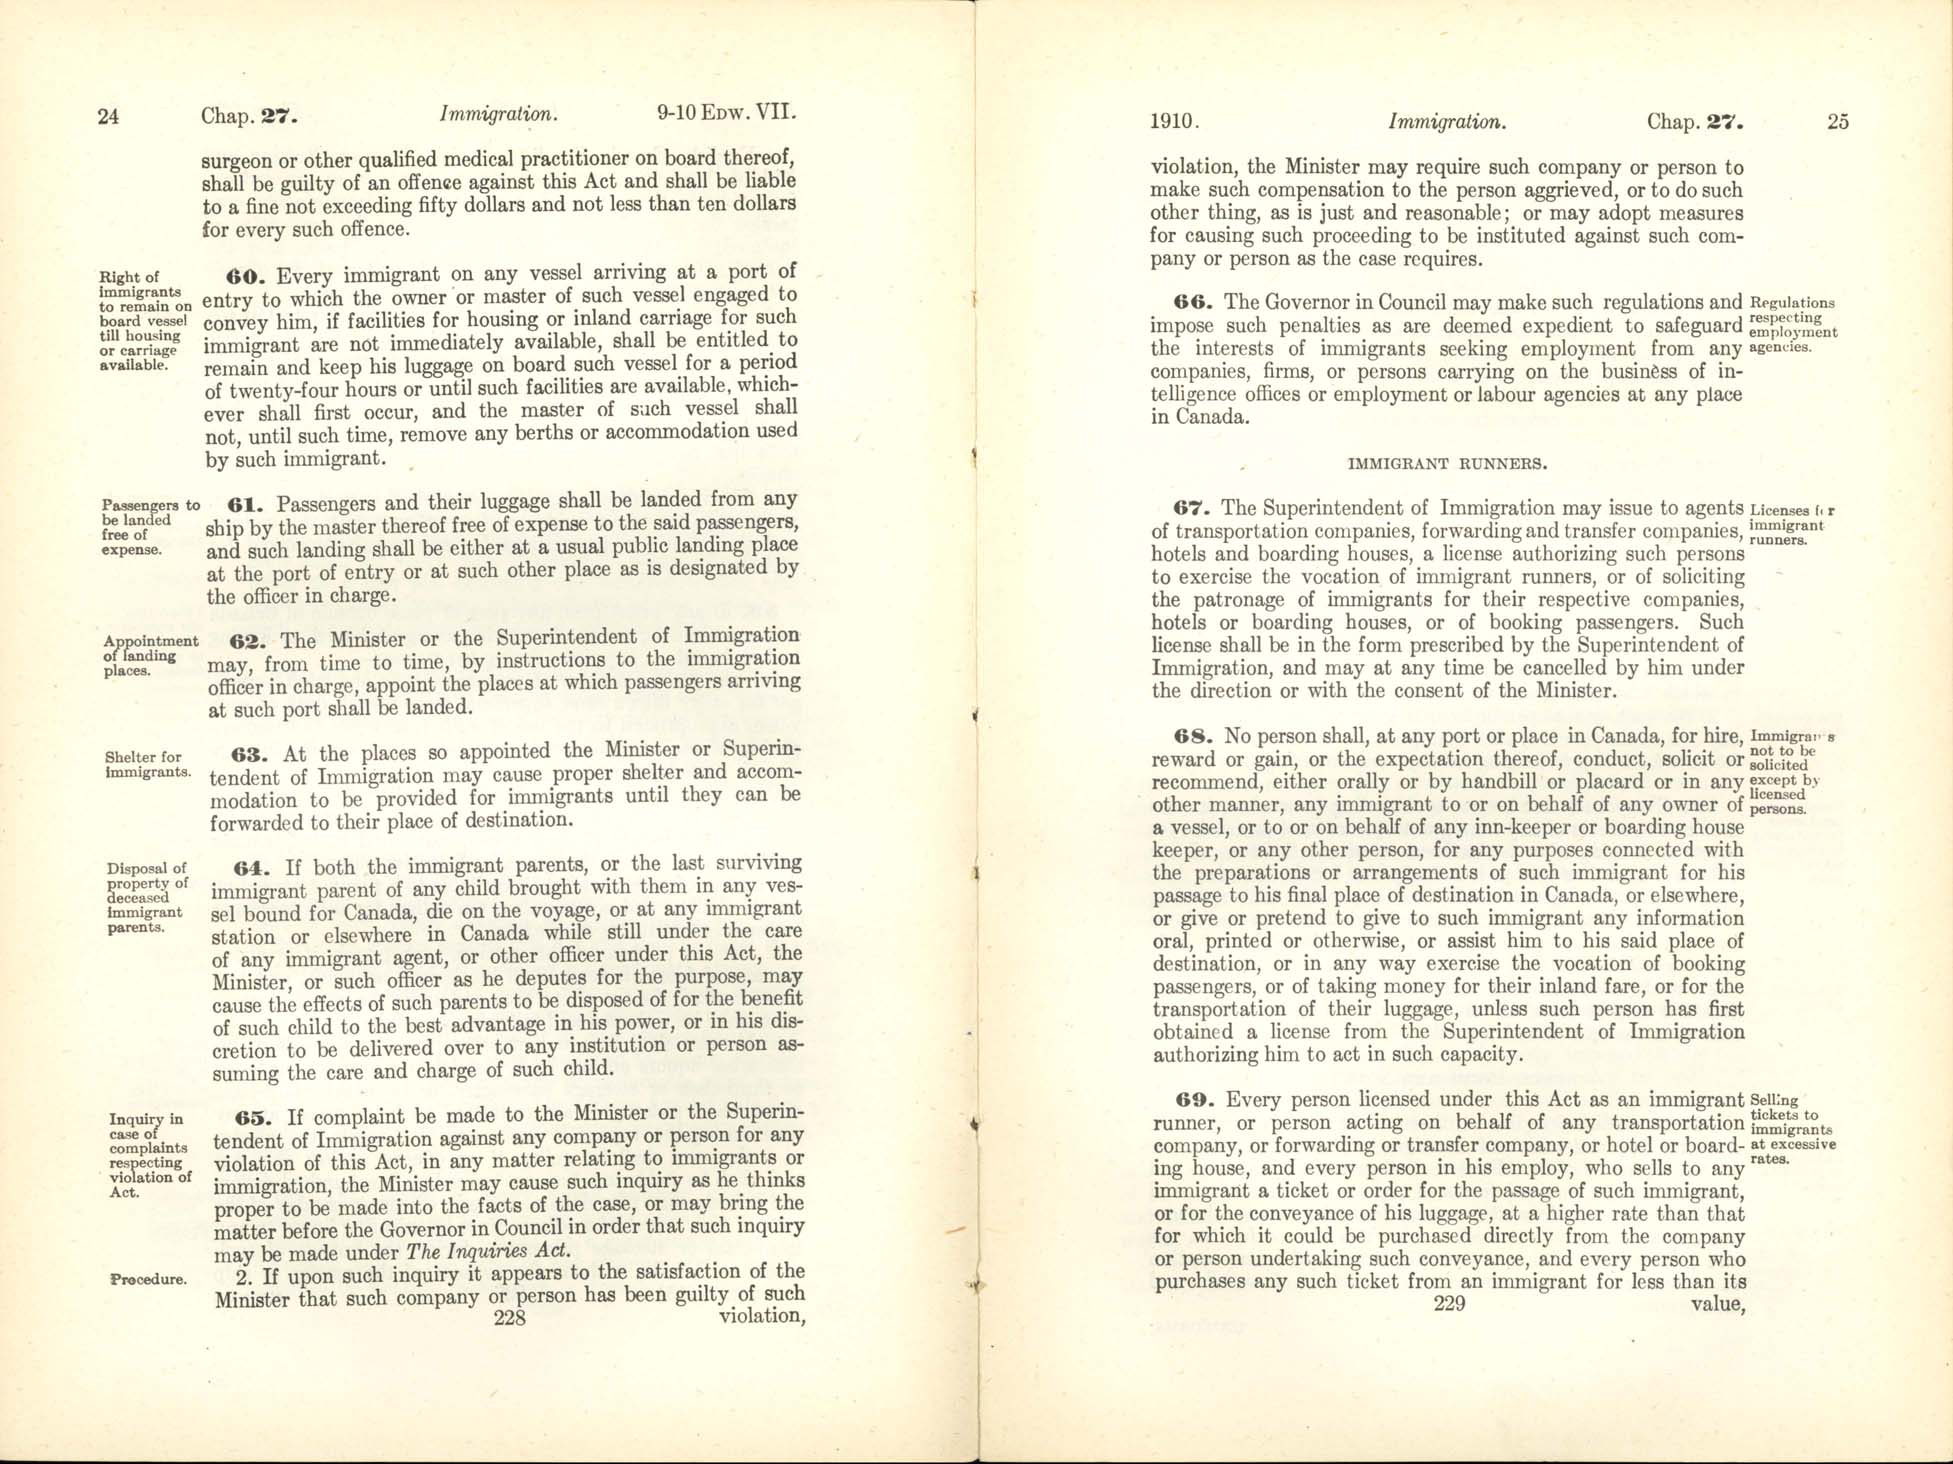 Chap. 27 Page 228, 229 Immigration Act, 1910